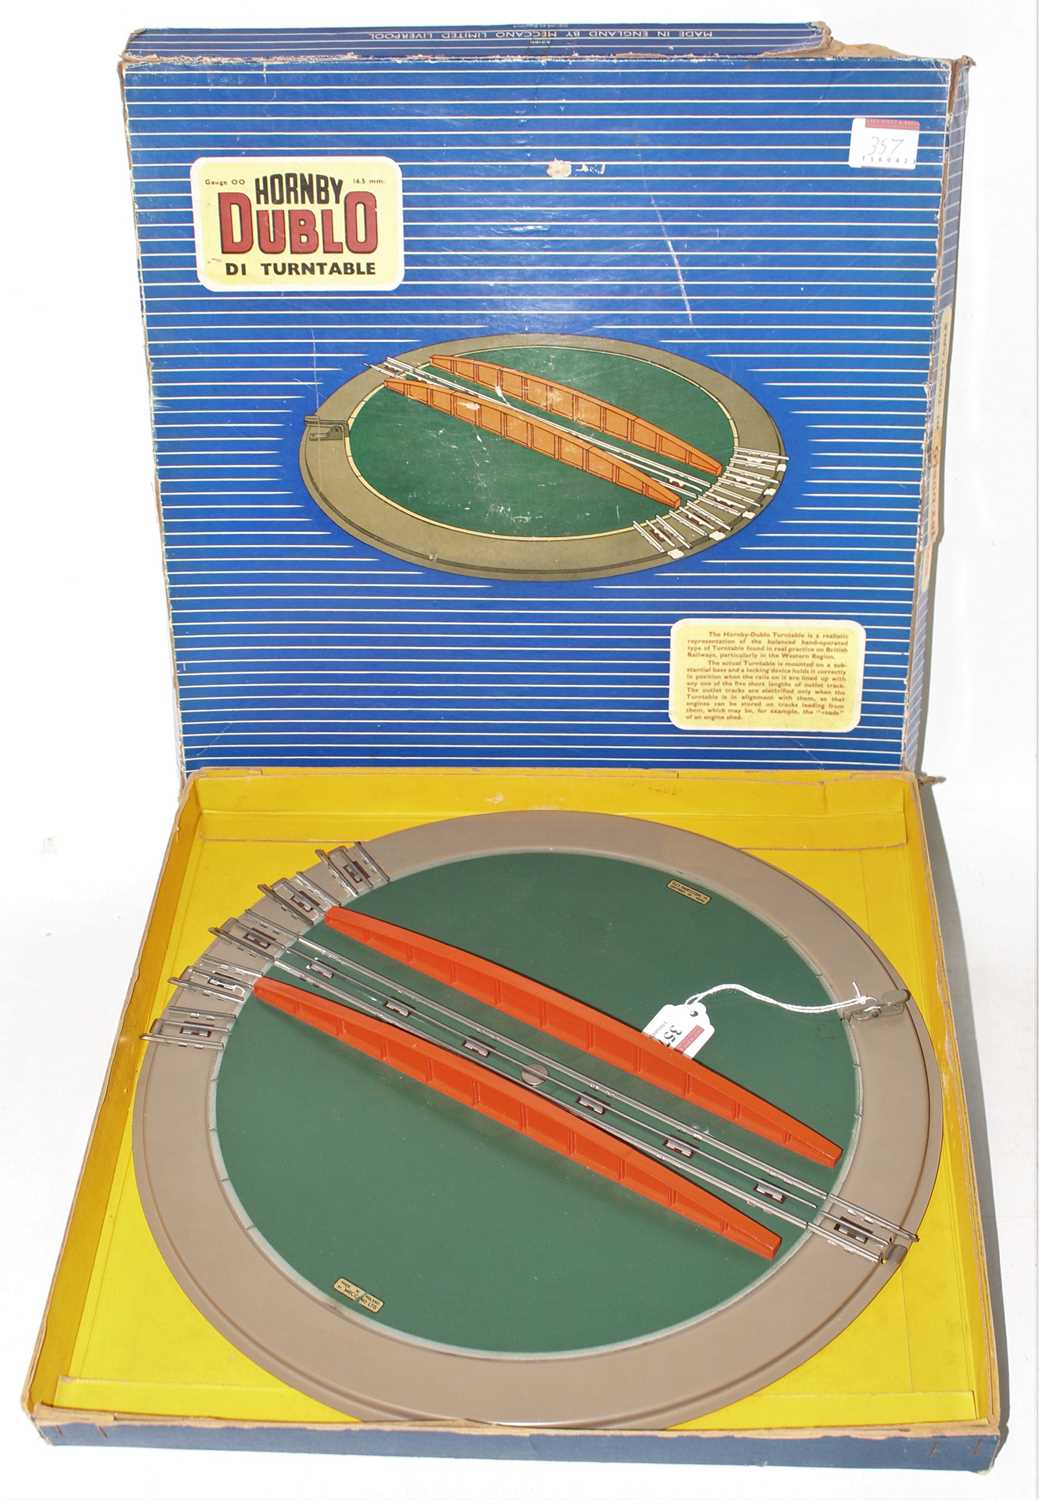 Lot 357 - Hornby Dublo D1 Turntable, very clean (VG-BF)